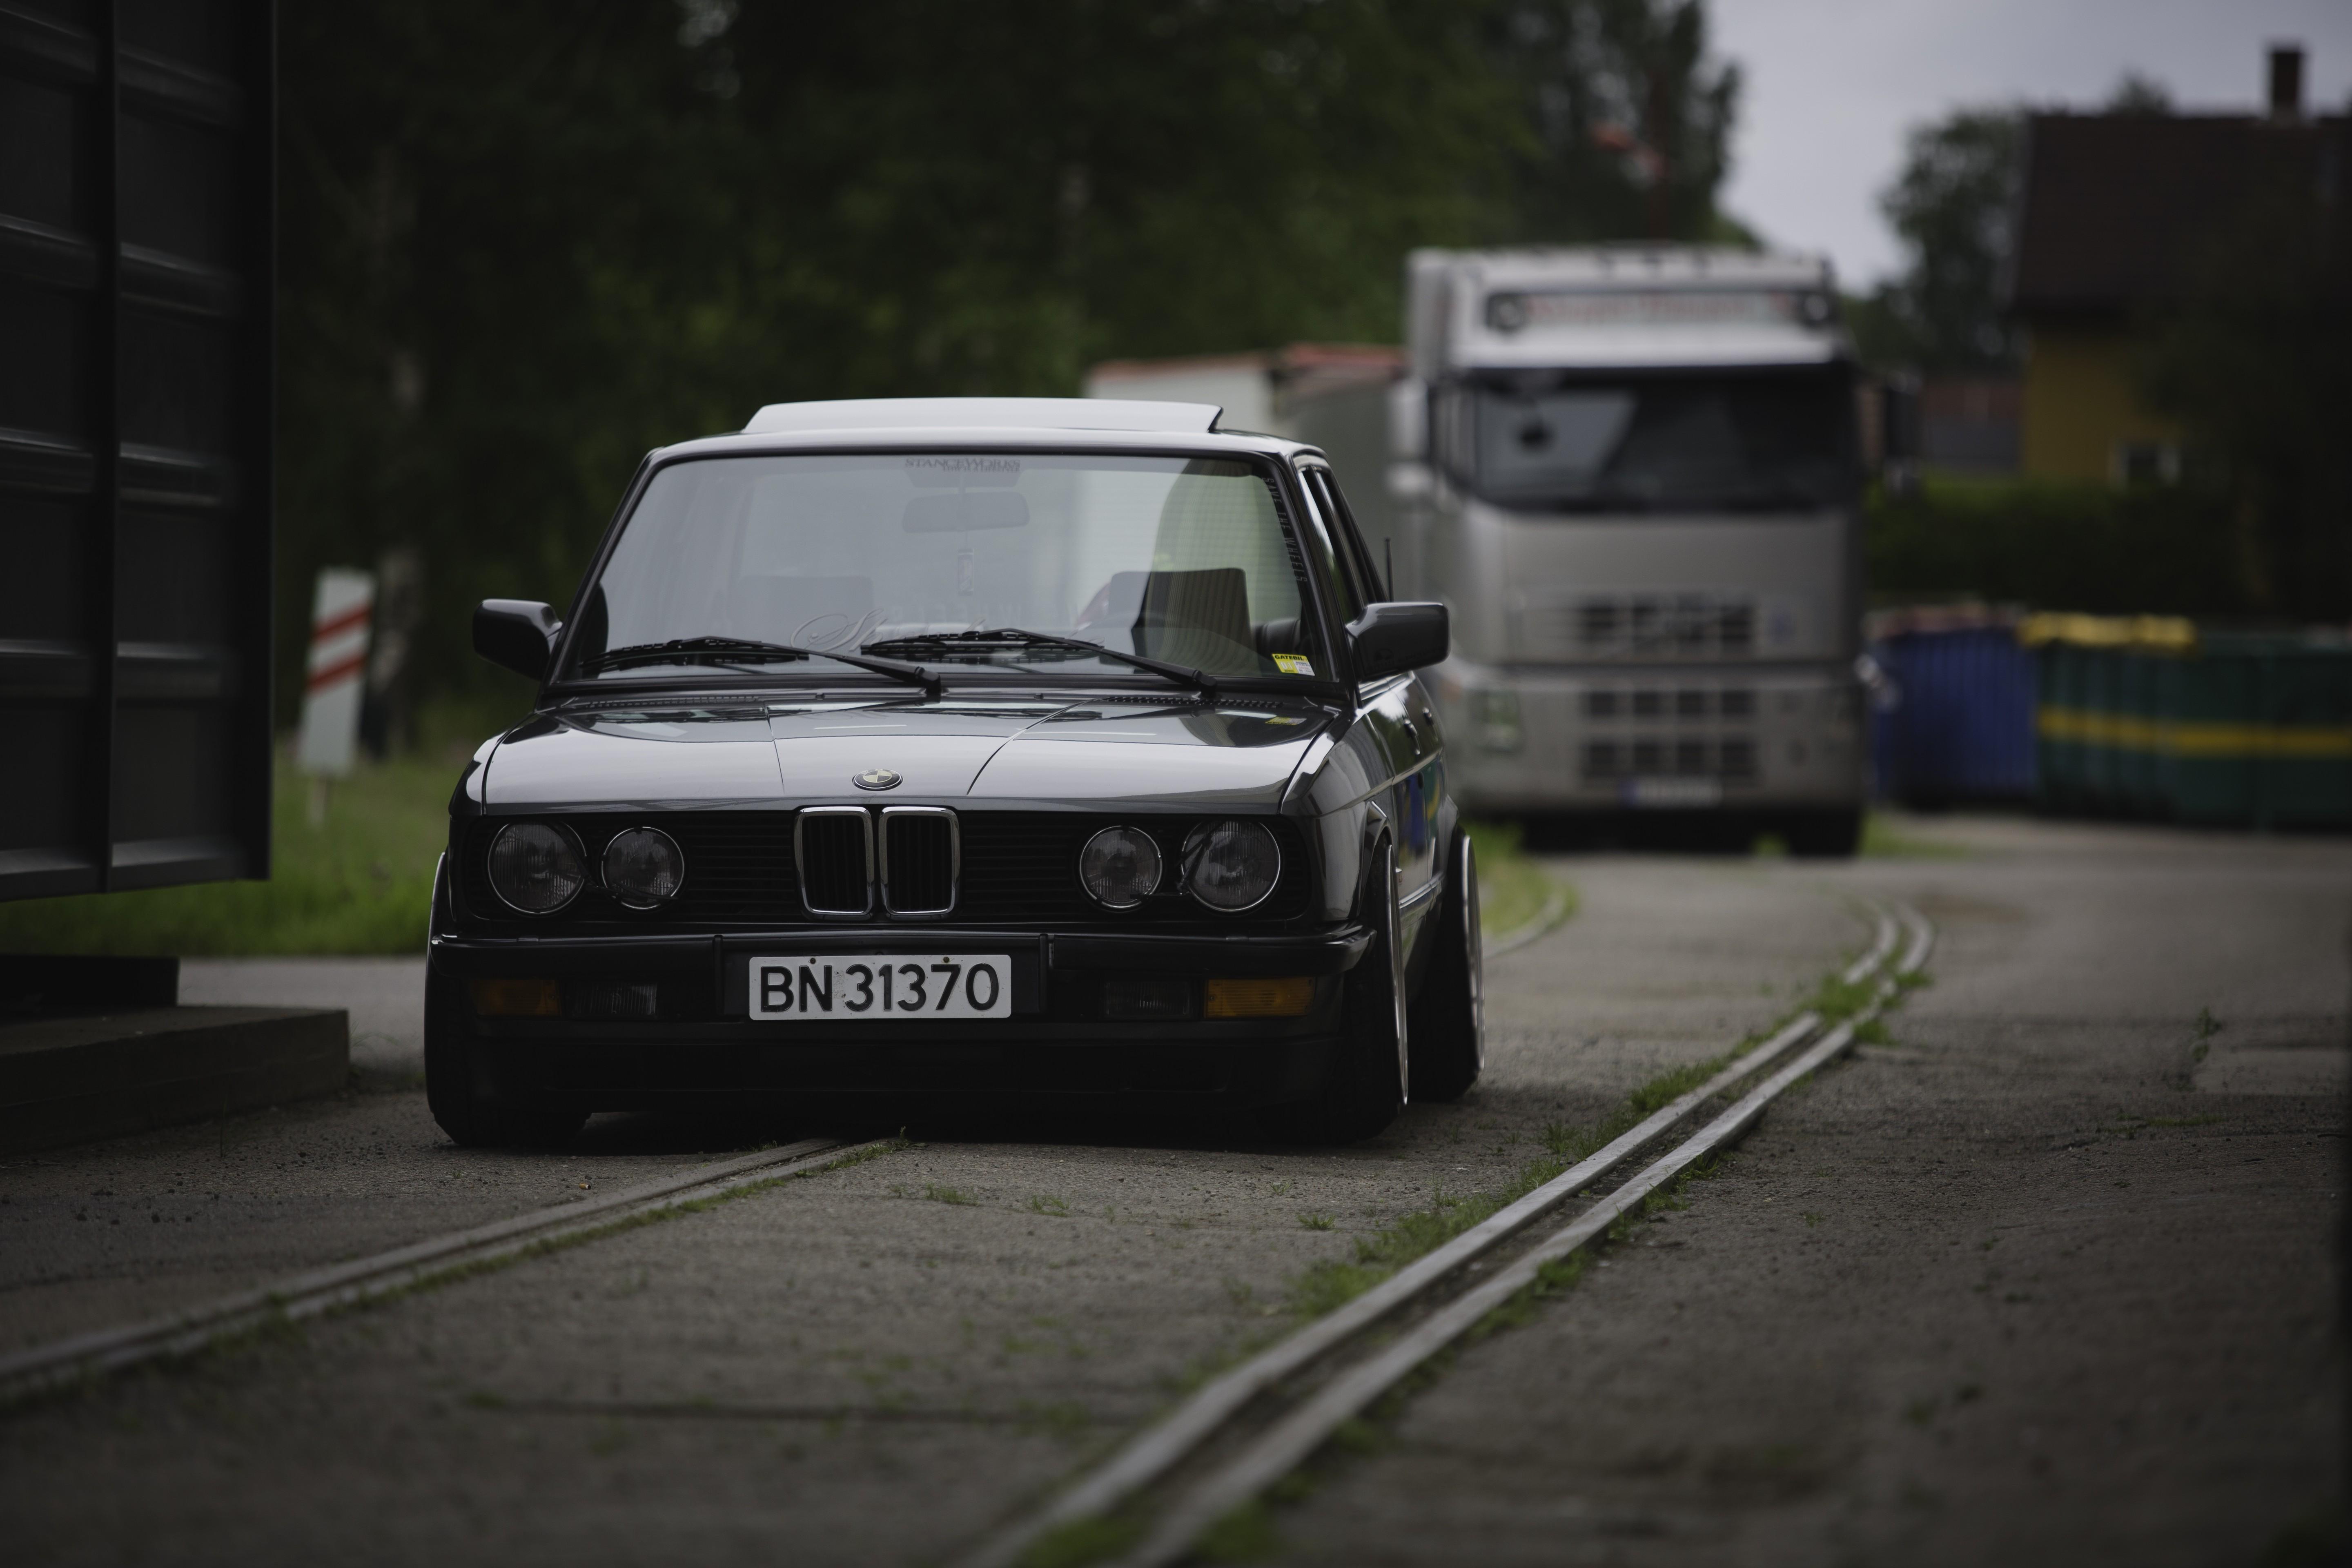 HD wallpaper, Norway, Black Cars, Numbers, Stanceworks, Static, Bmw, German Cars, Bmw 5 Series, Car, Bmw E28, Low Car, Canon 5D